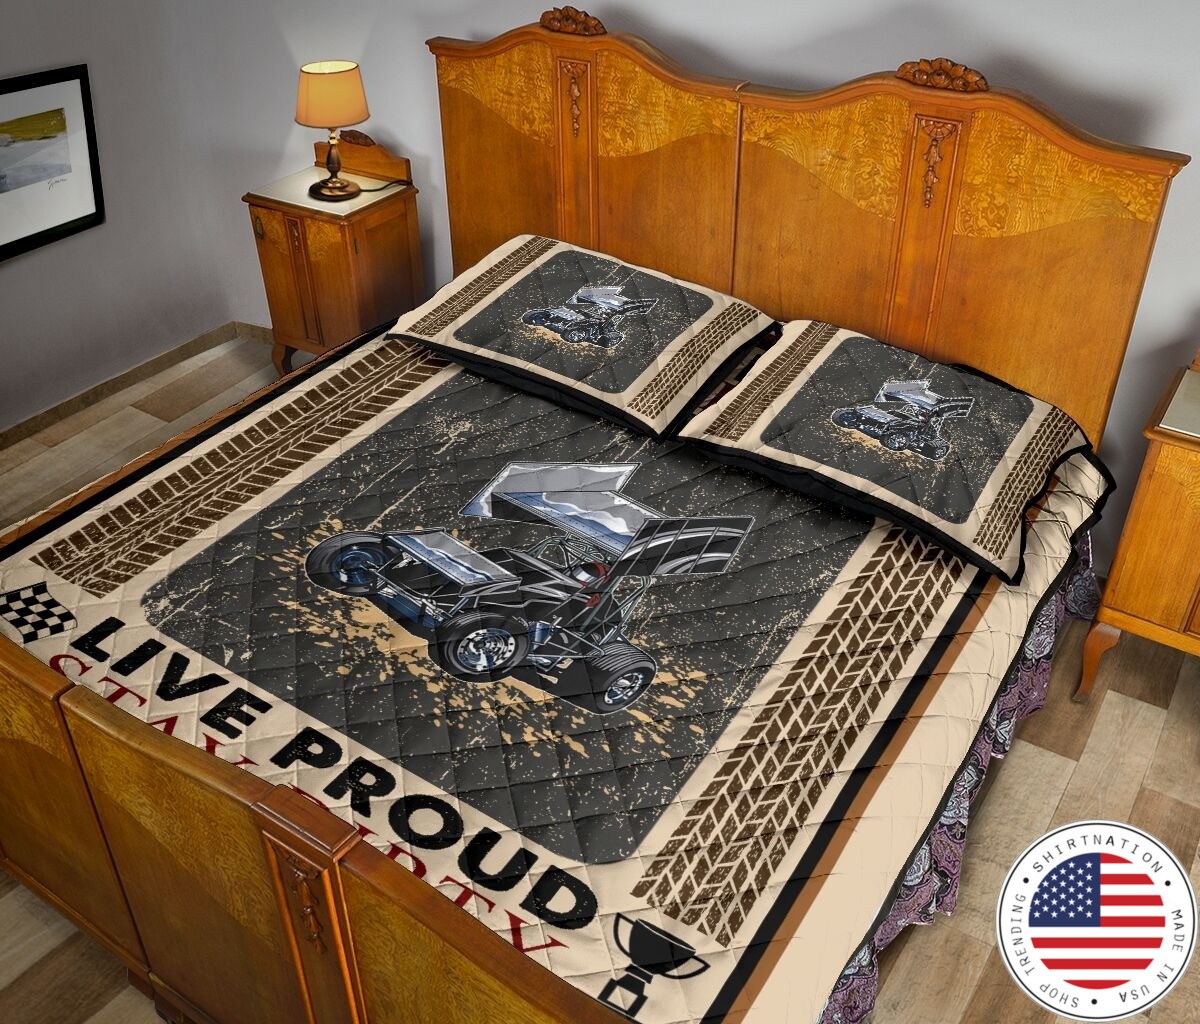 Car racing Live fast live loud live proud stay dirty bedding set3